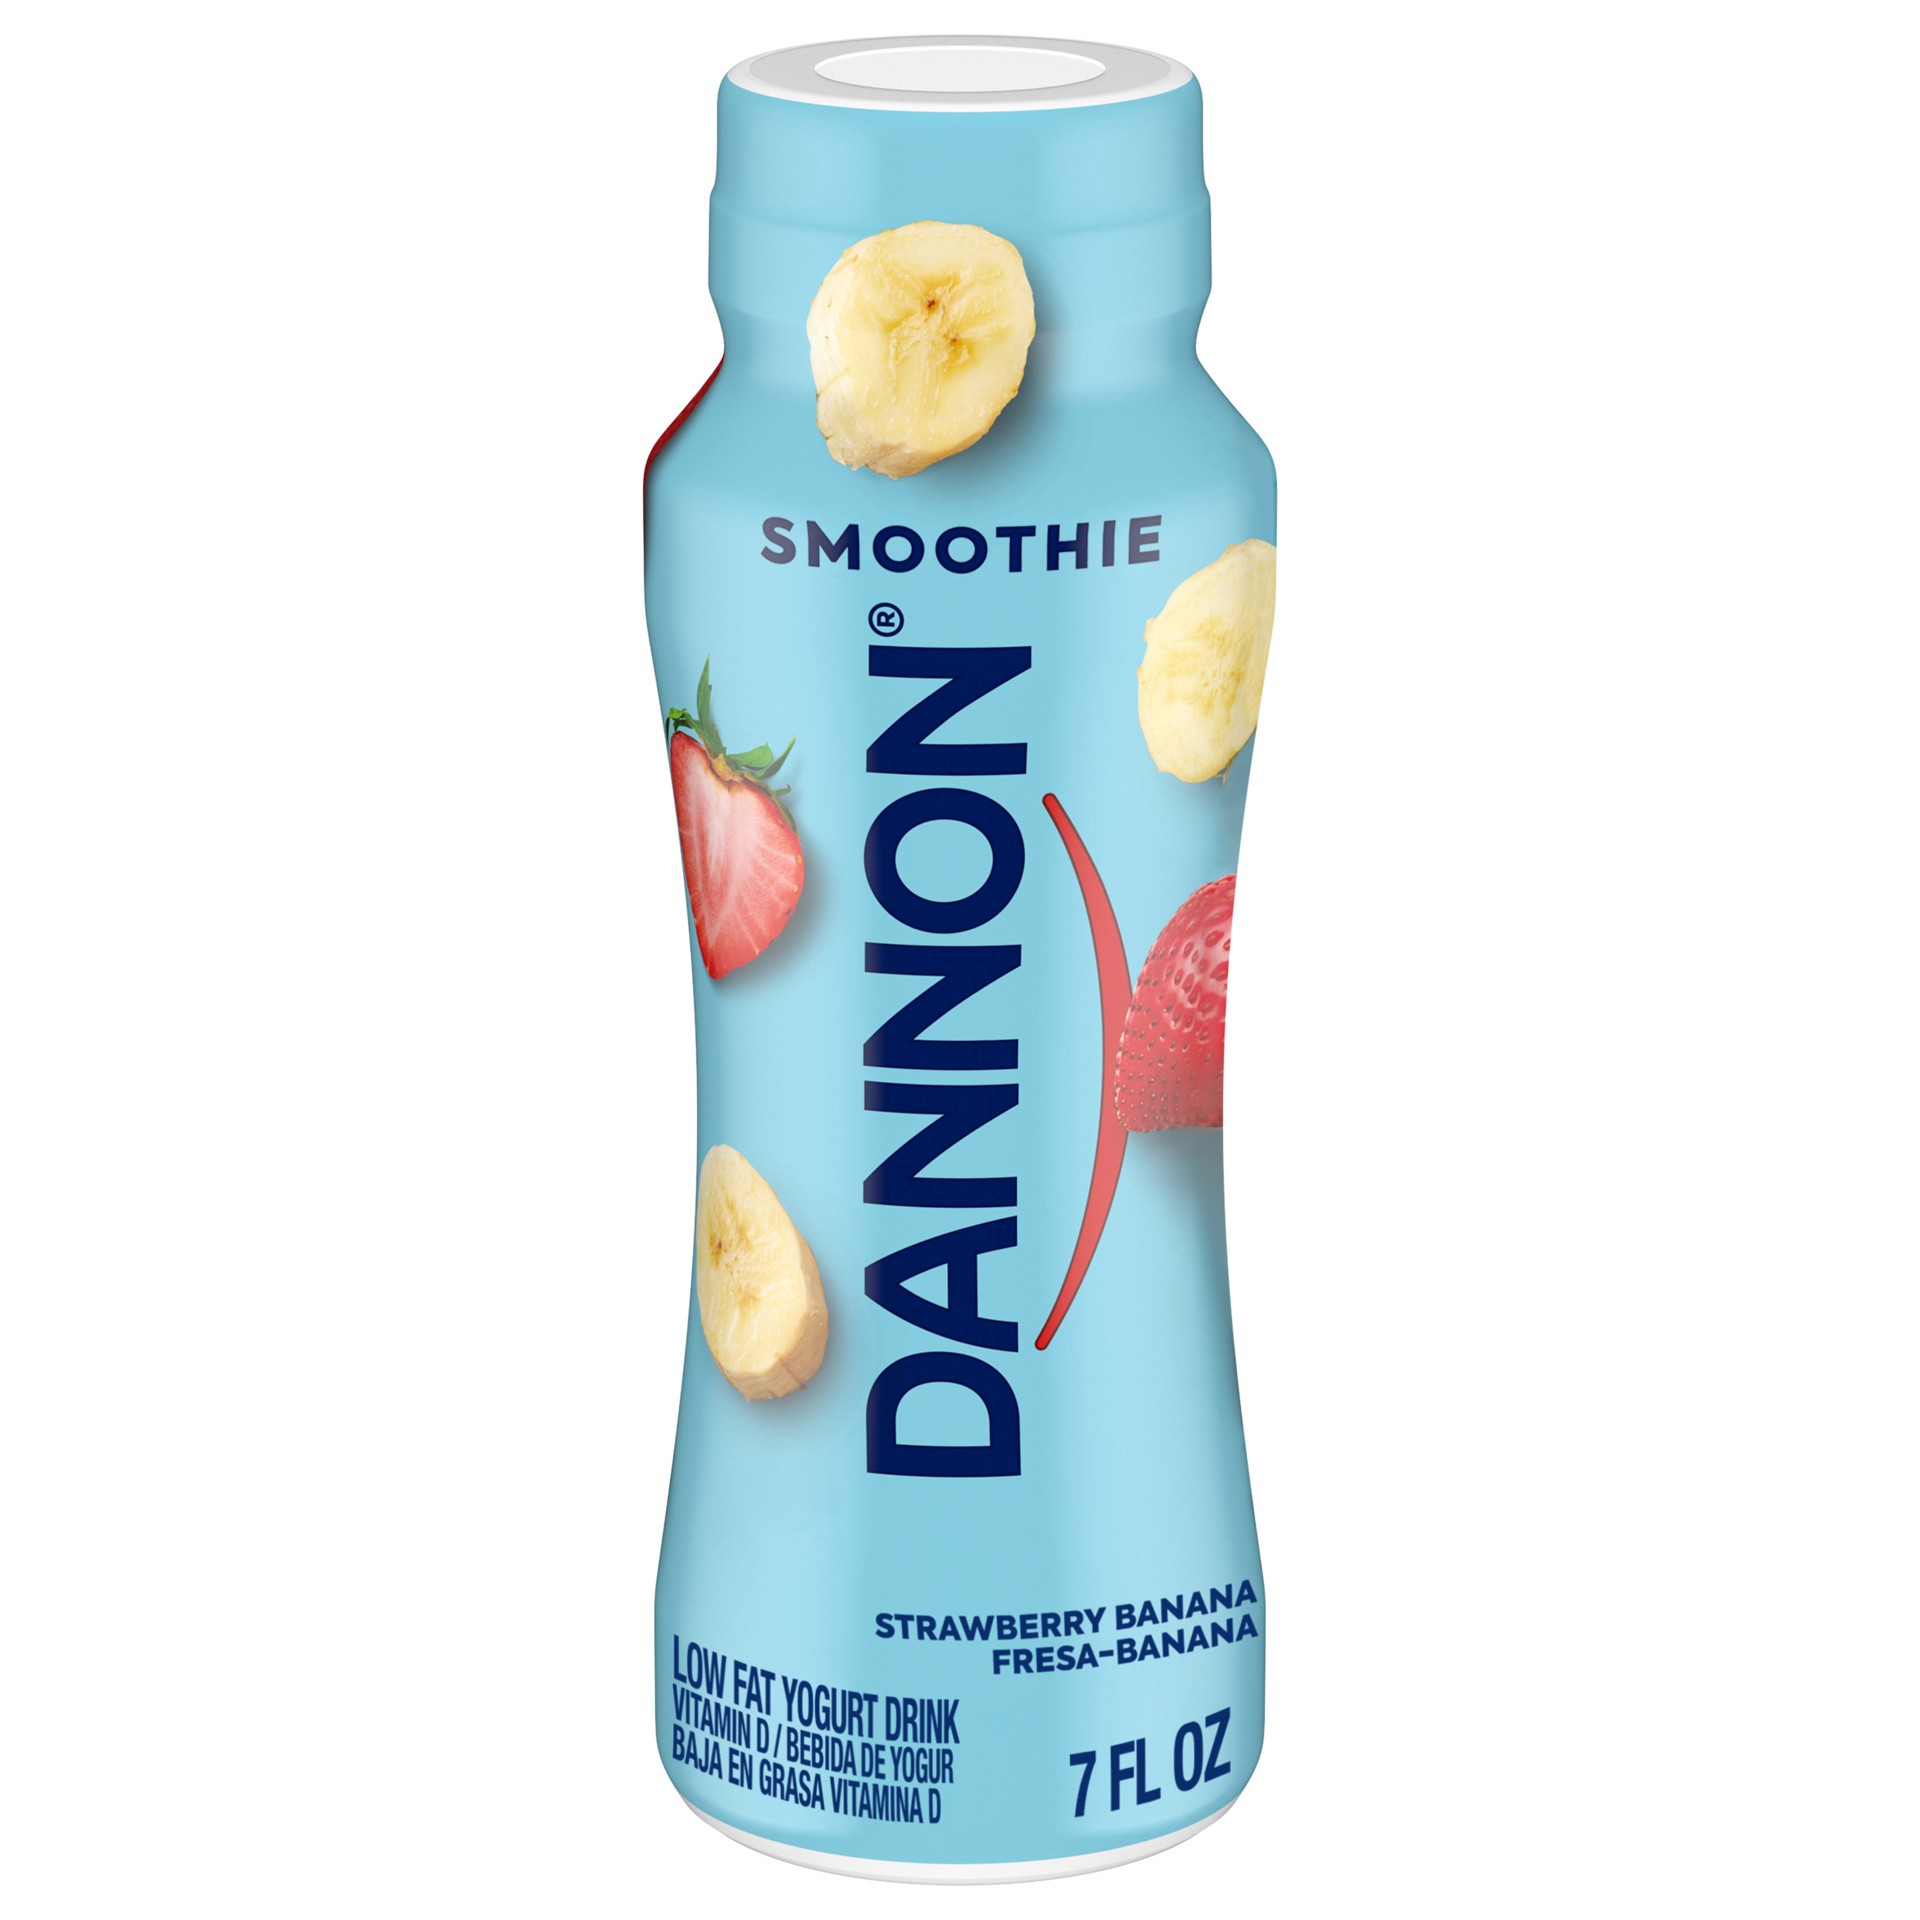 slide 1 of 4, Dannon Strawberry Banana Smoothie Low Fat Yogurt Drink, Gluten Free On the Go Snacks with Strawberry Banana Flavor, Excellent Source of Calcium and Vitamin D, 7 FL OZ Bottle, 7 fl oz